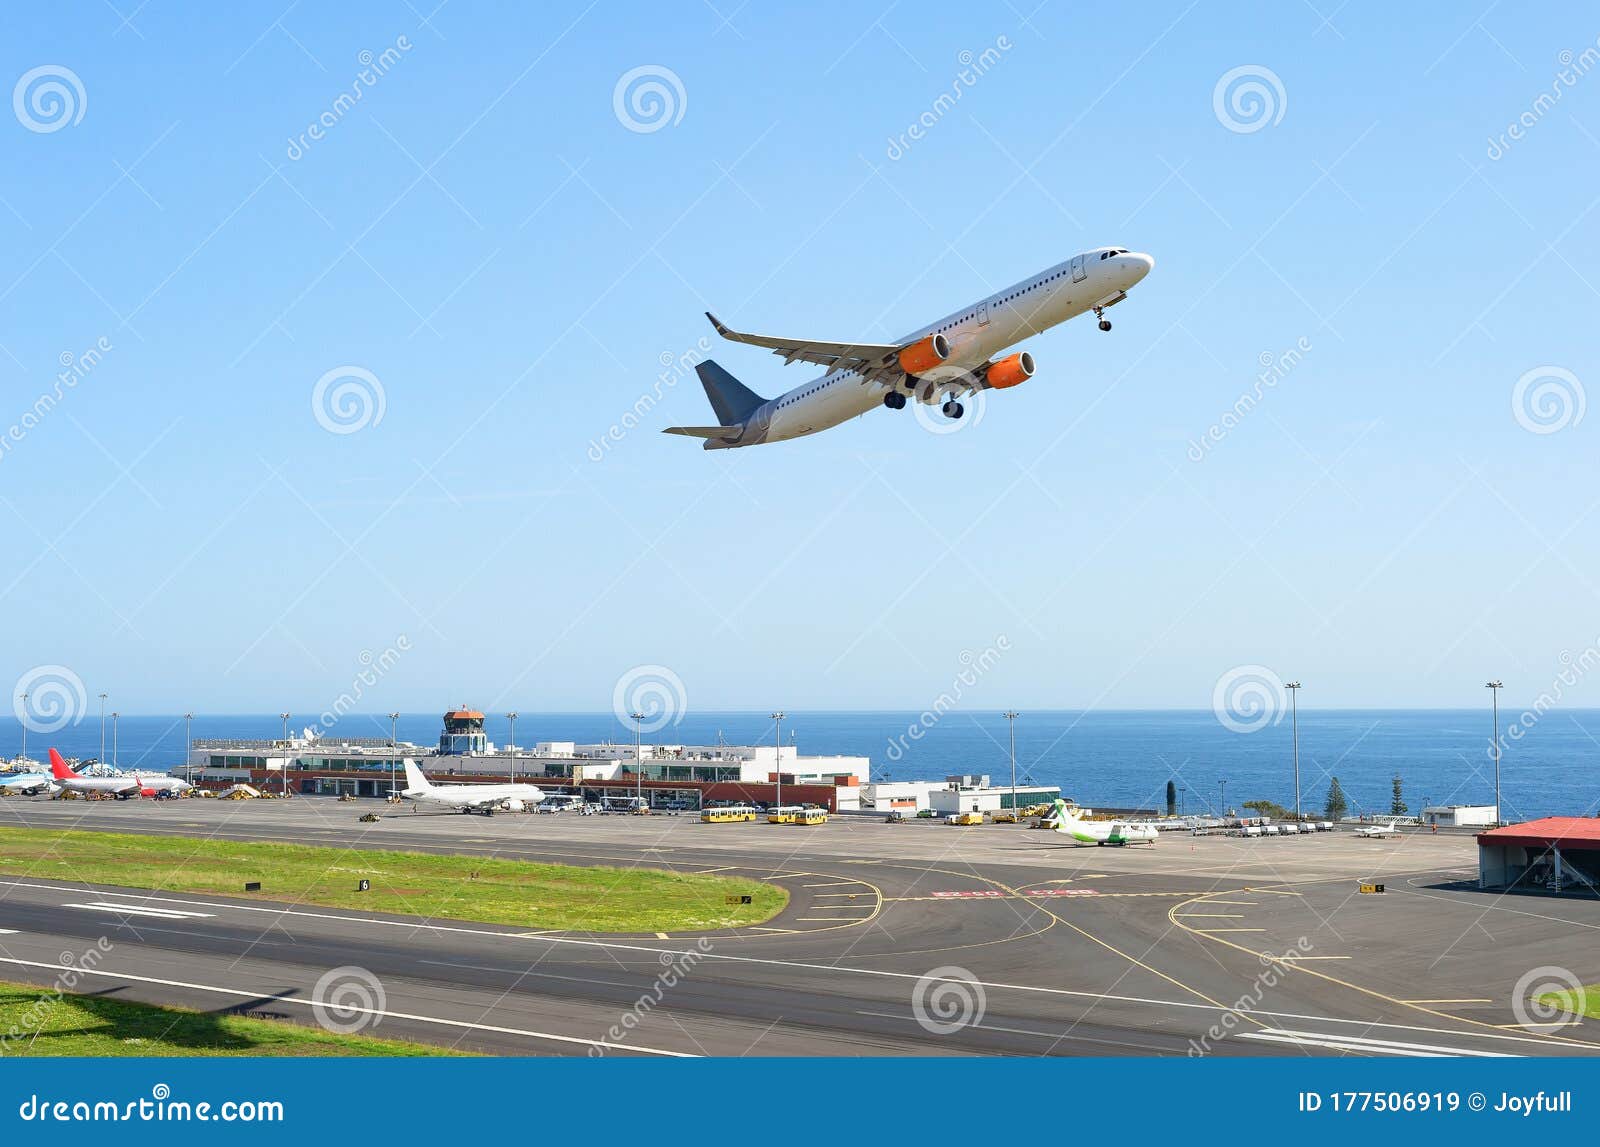 Airplane Taking Off Madeira Airport Editorial Stock Image Image Of Trip Destination